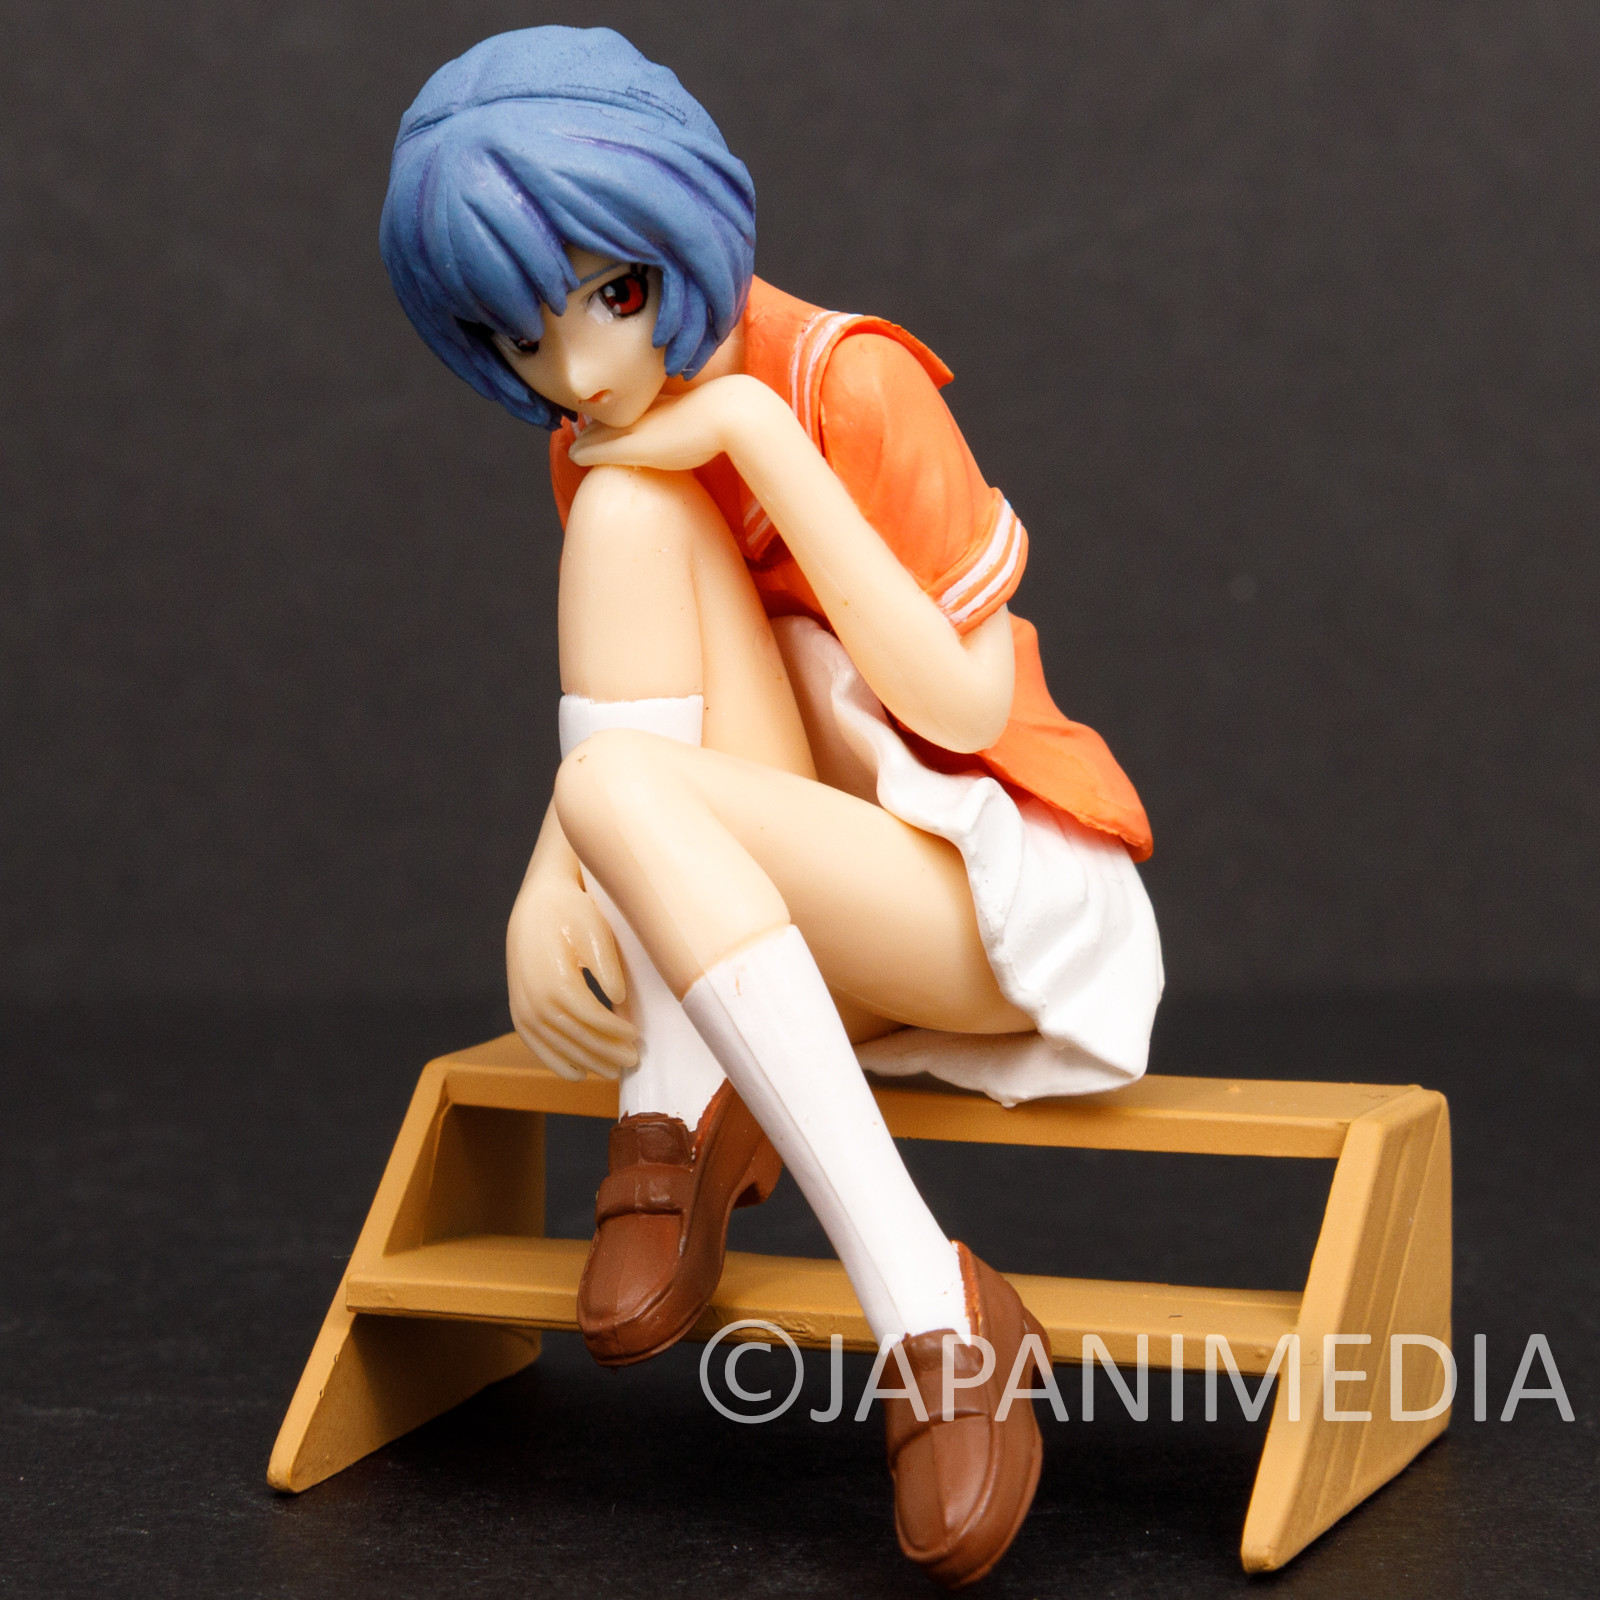 Evangelion Rei Ayanami Casual Clothes On the Stairs Figure BANDAI JAPAN